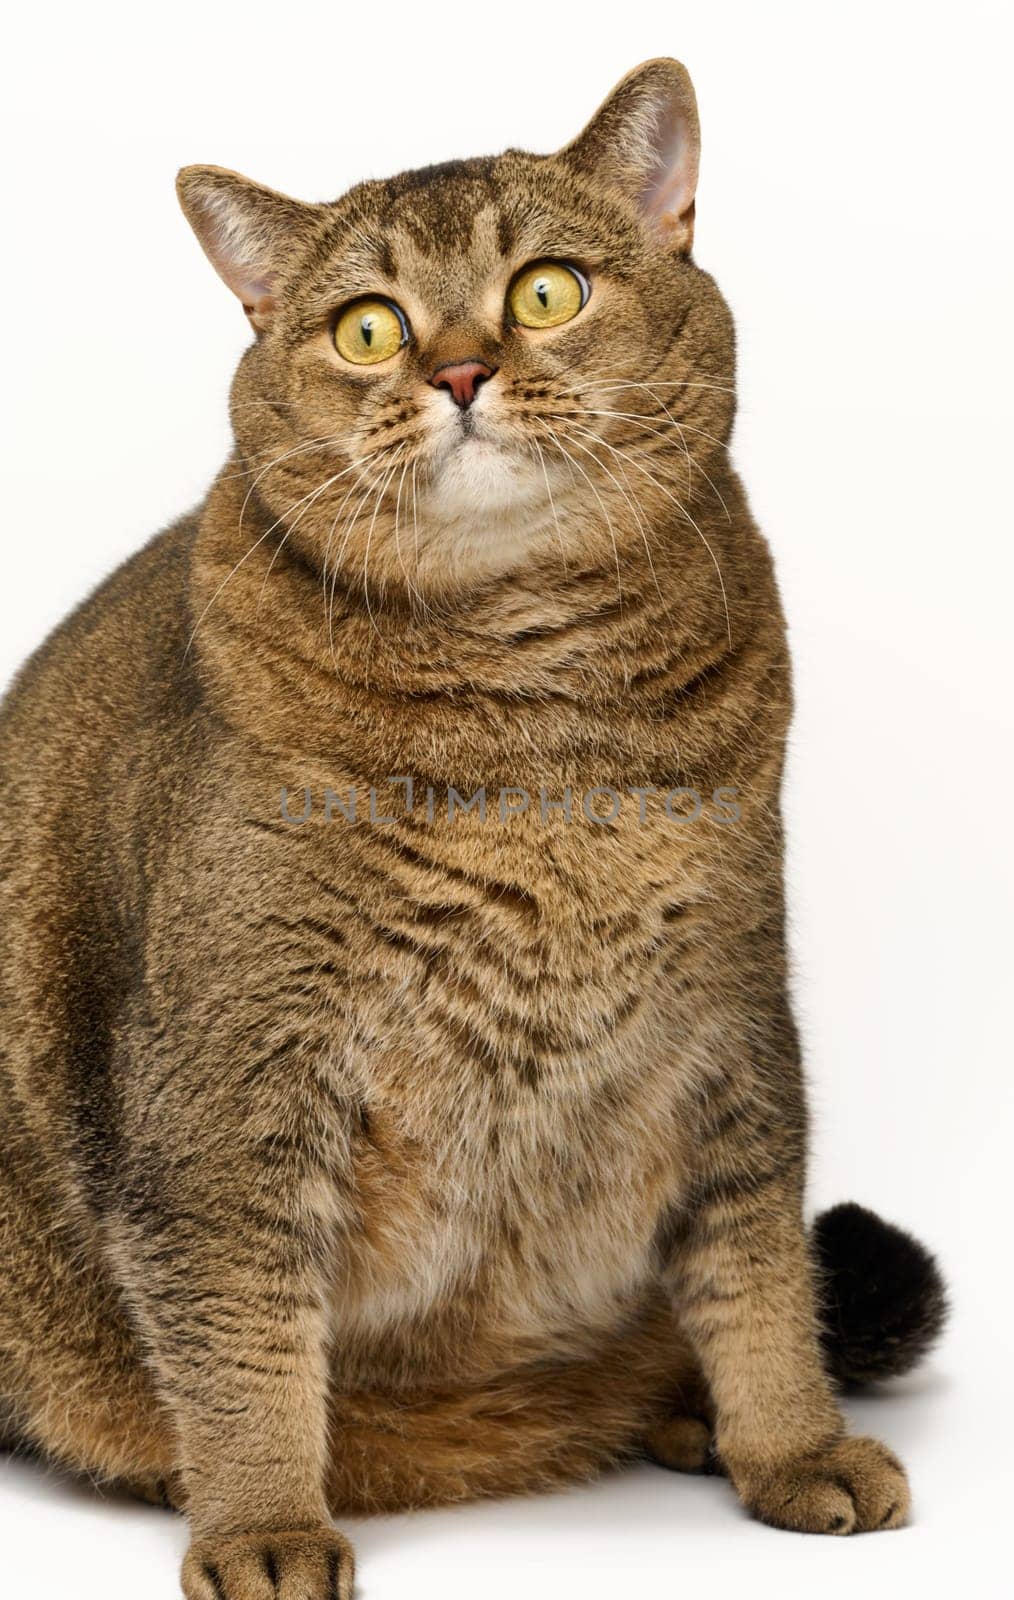 Adult gray cat sitting on a white background, funny face by ndanko